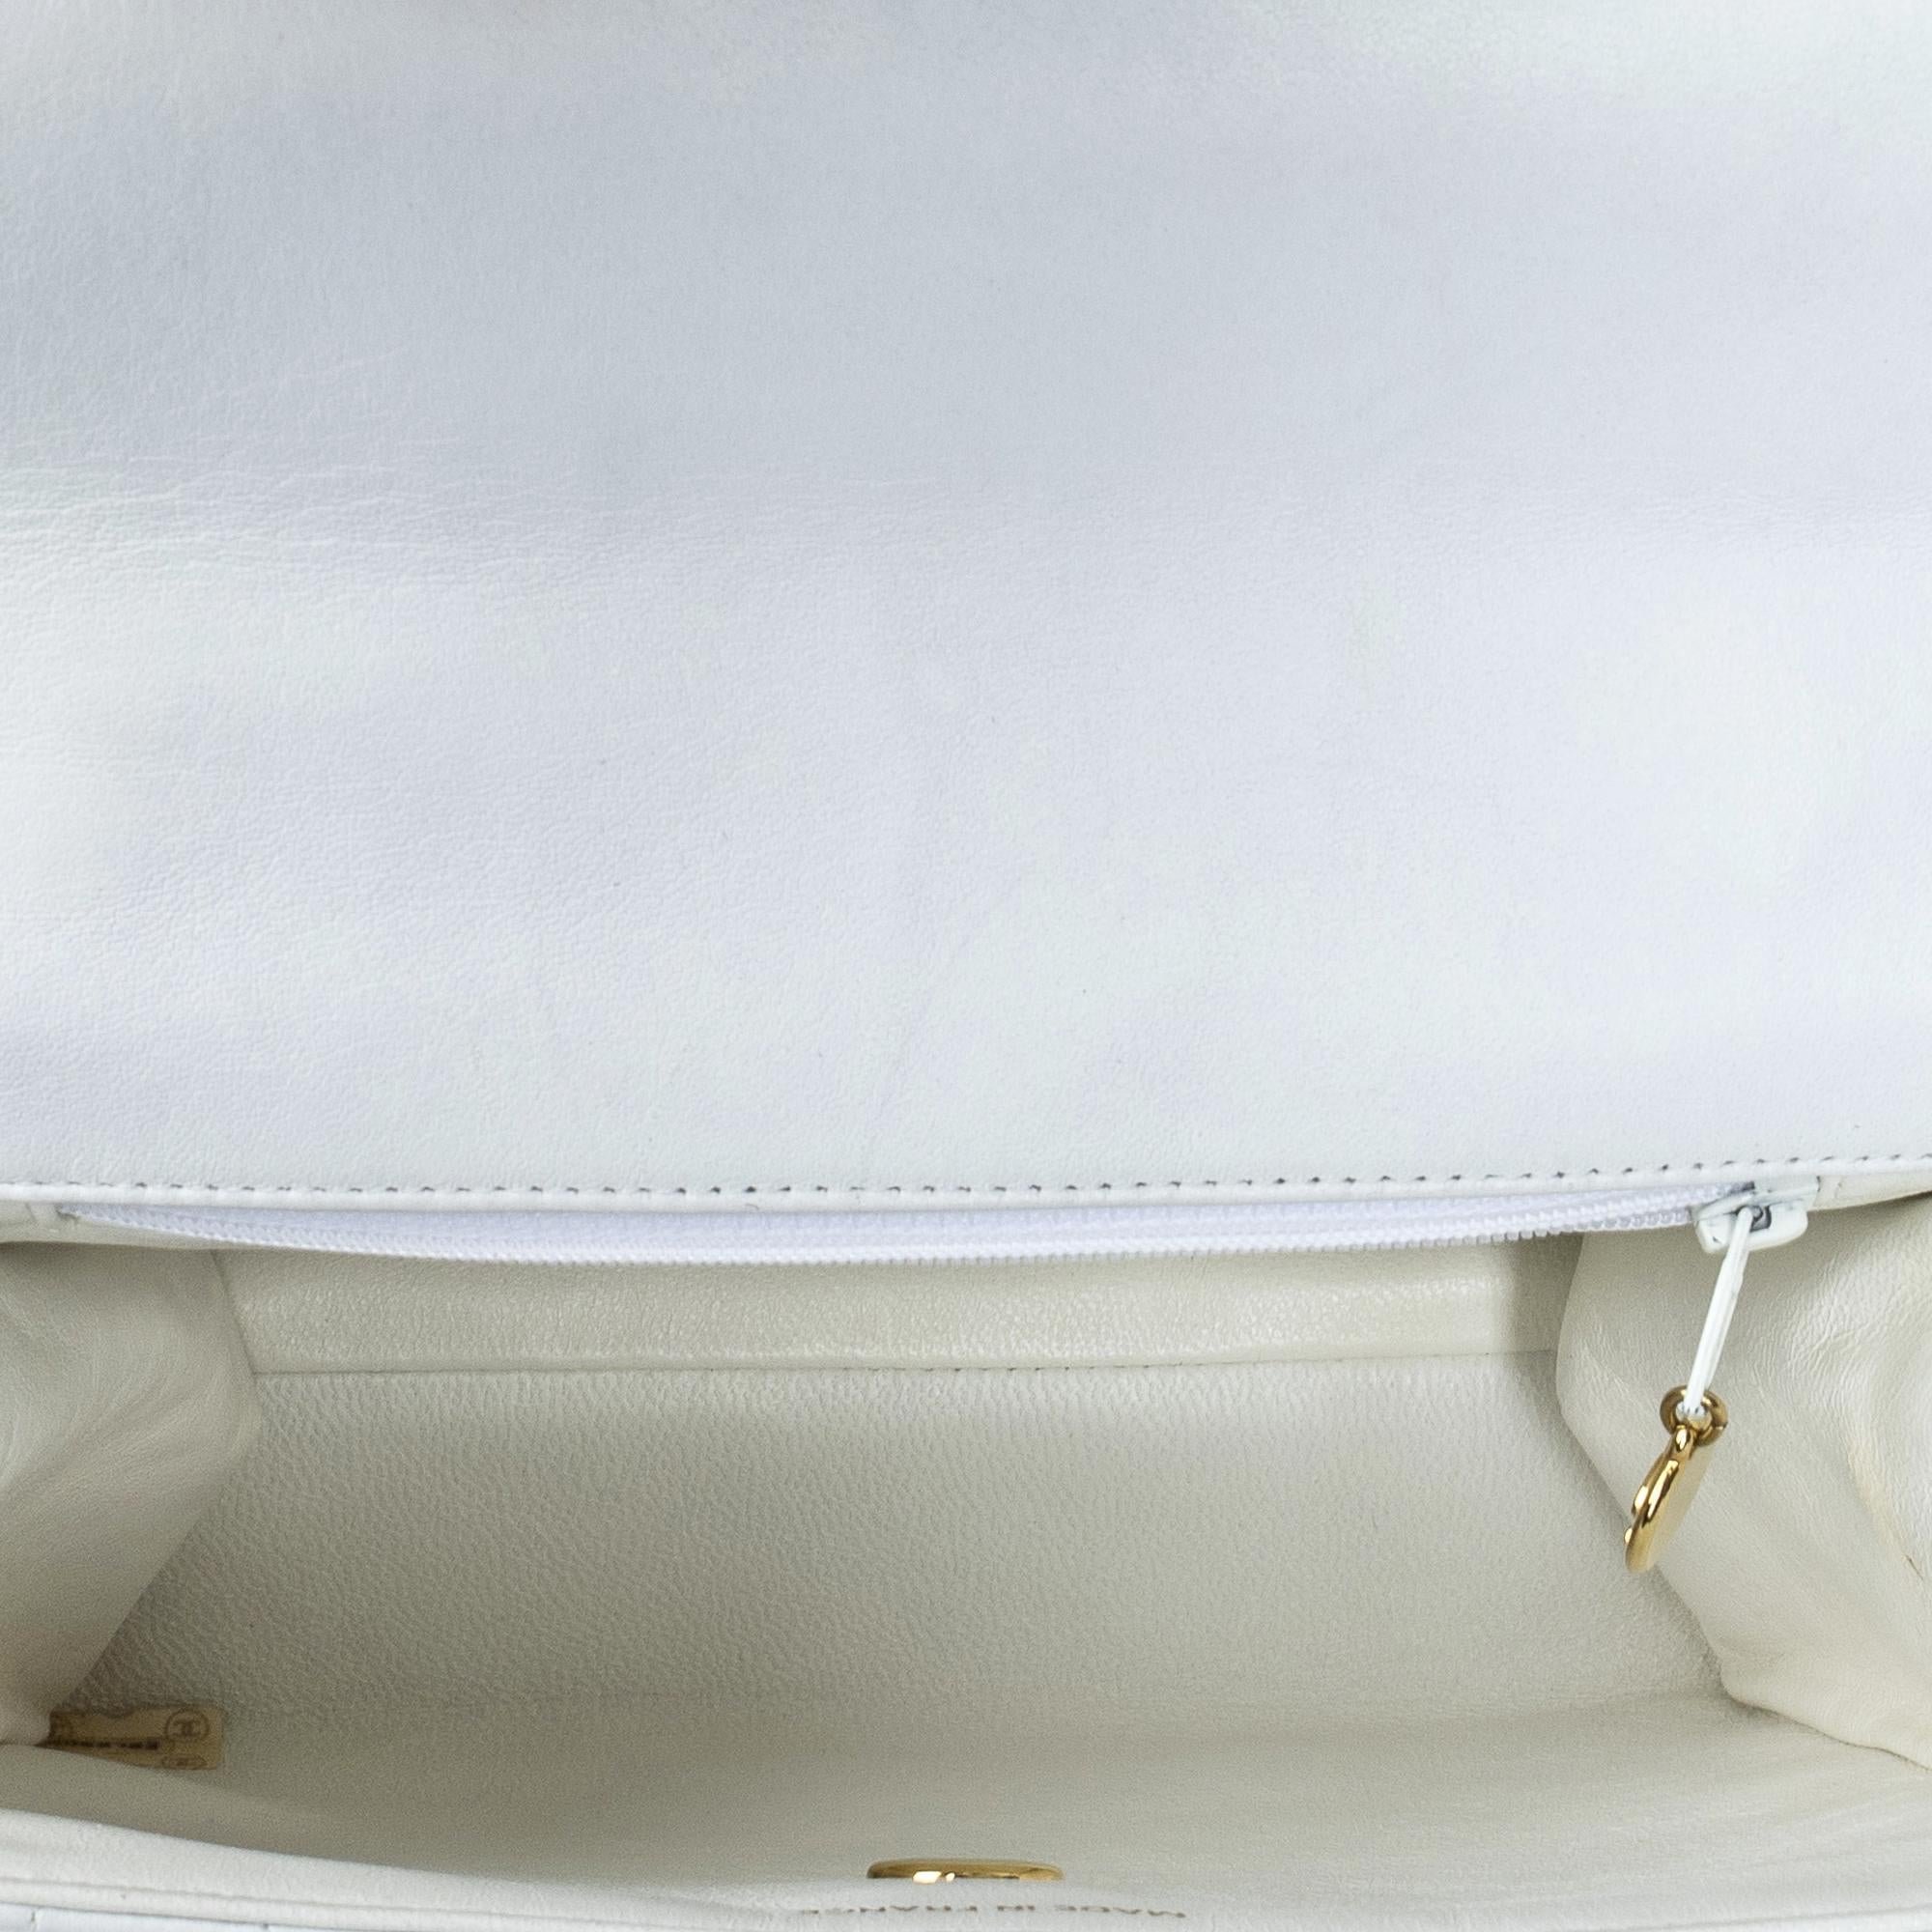 Chanel 1991 White Striated CC Turnlock Flap Bag For Sale 1